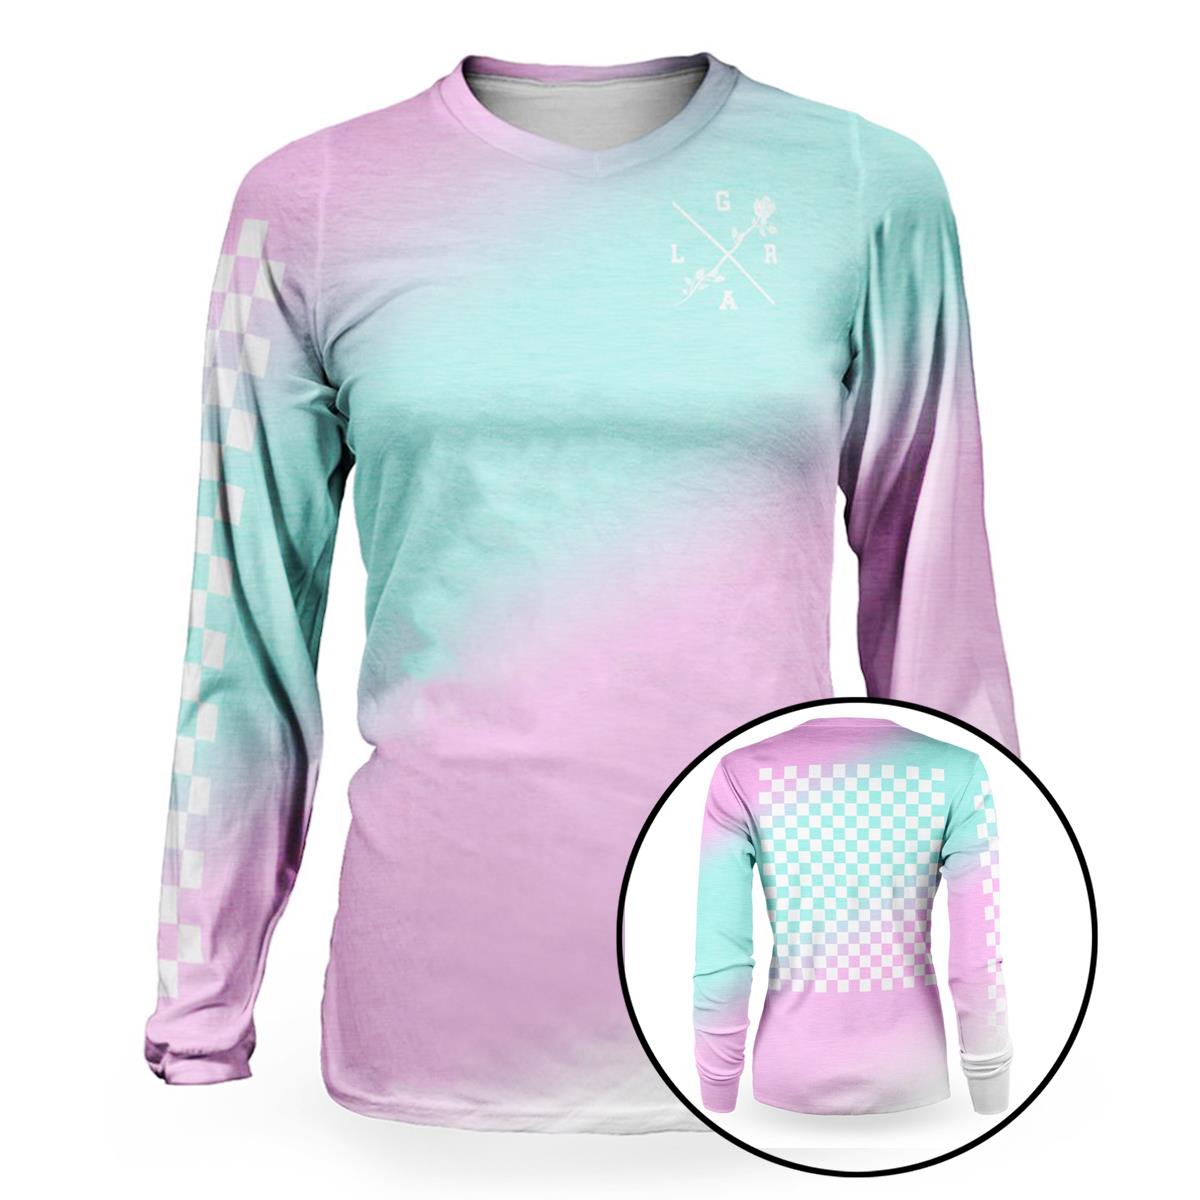 Loose Riders Girls Bike Jersey Cult of Shred Checkers Color - Pink/Turquoise/White